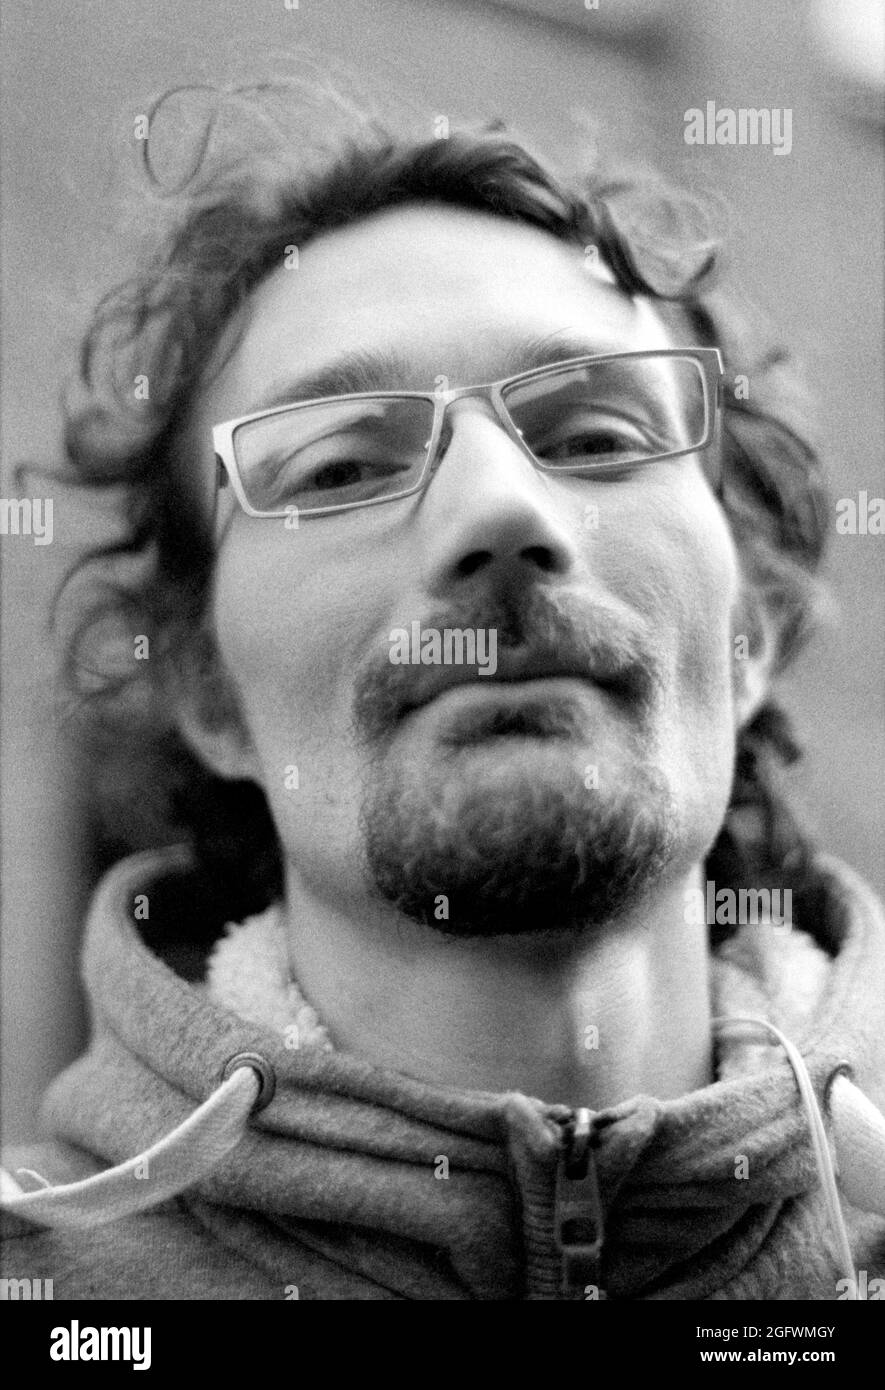 Tilburg, Netherlands. Black & White portrait of an adult, Peter caucasian male wearing glasses and walking the streets down town. Shot on Analog Film. Stock Photo